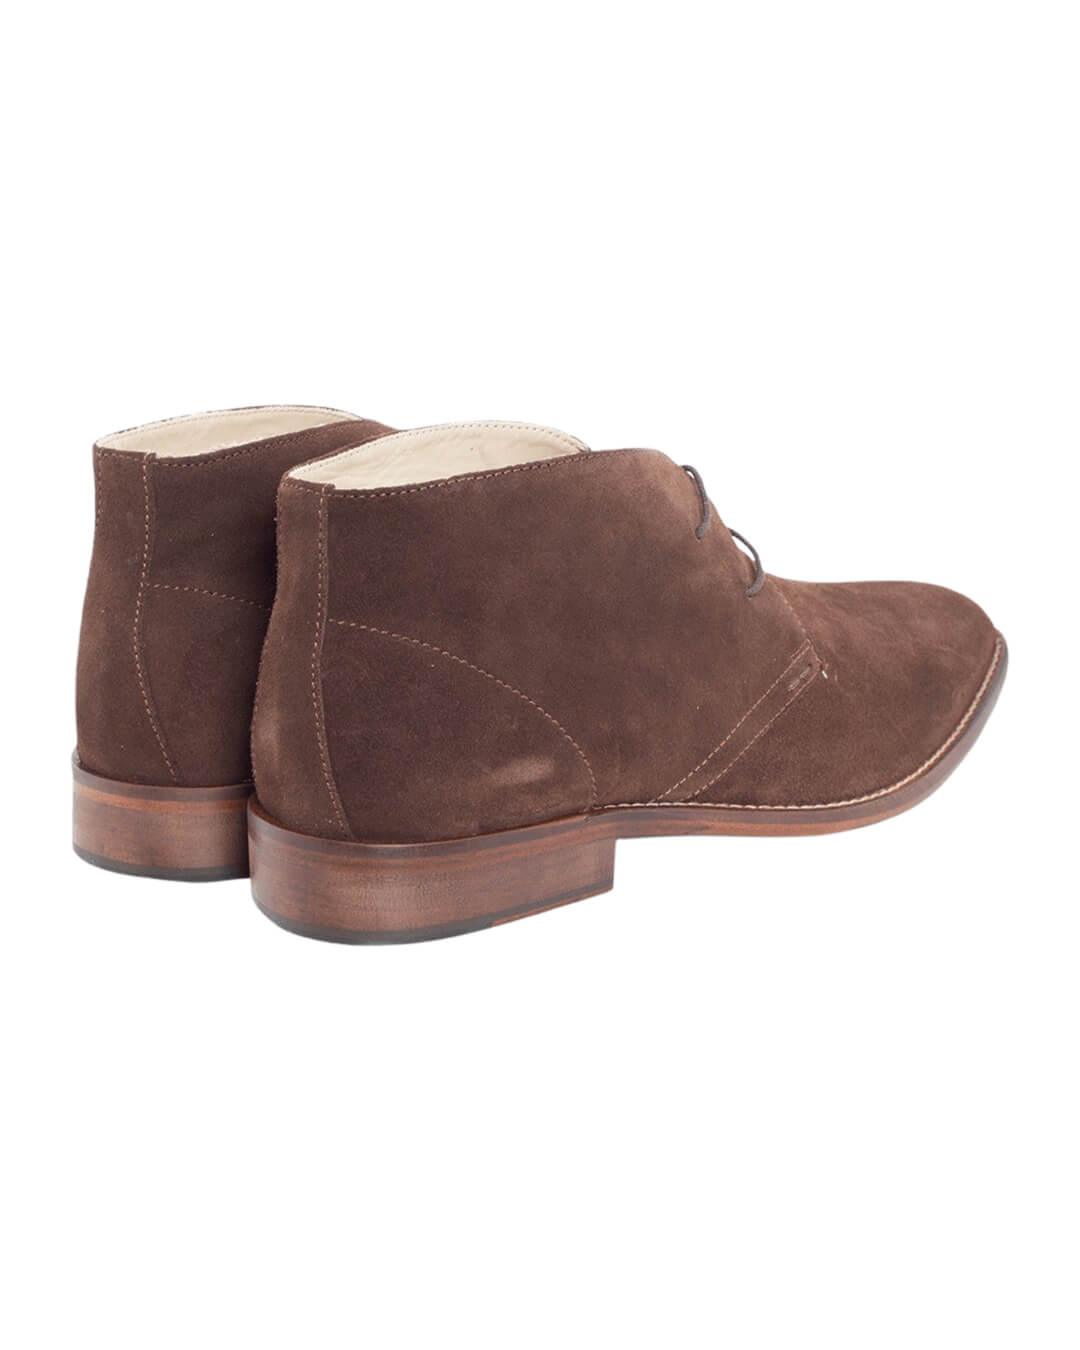 Gagliardi Shoes Brown Suede Desert Boots